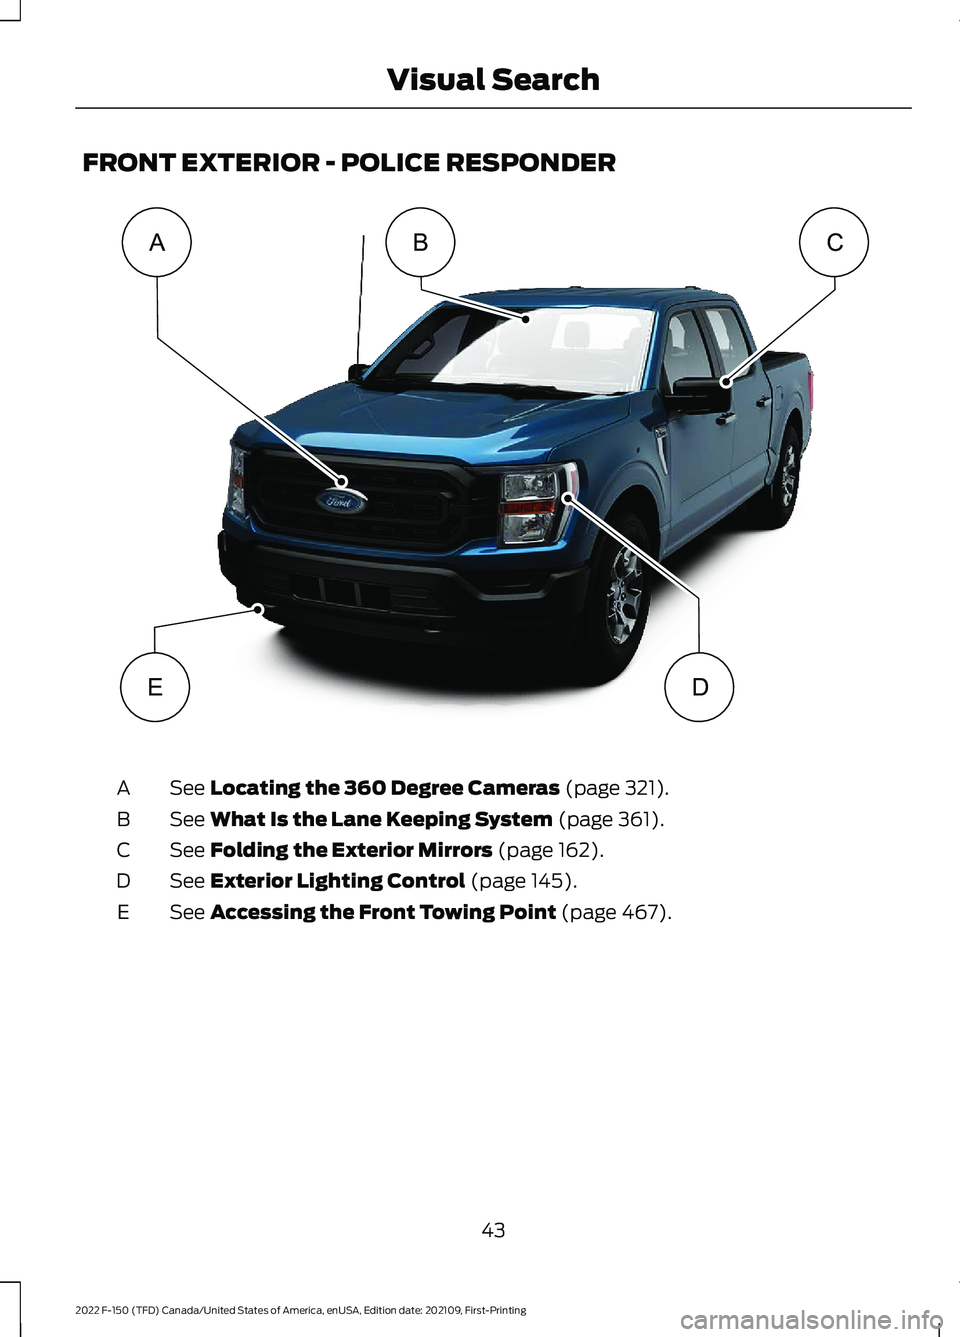 FORD F-150 2022  Owners Manual FRONT EXTERIOR - POLICE RESPONDER
See Locating the 360 Degree Cameras (page 321).
A
See 
What Is the Lane Keeping System (page 361).
B
See 
Folding the Exterior Mirrors (page 162).
C
See 
Exterior Lig